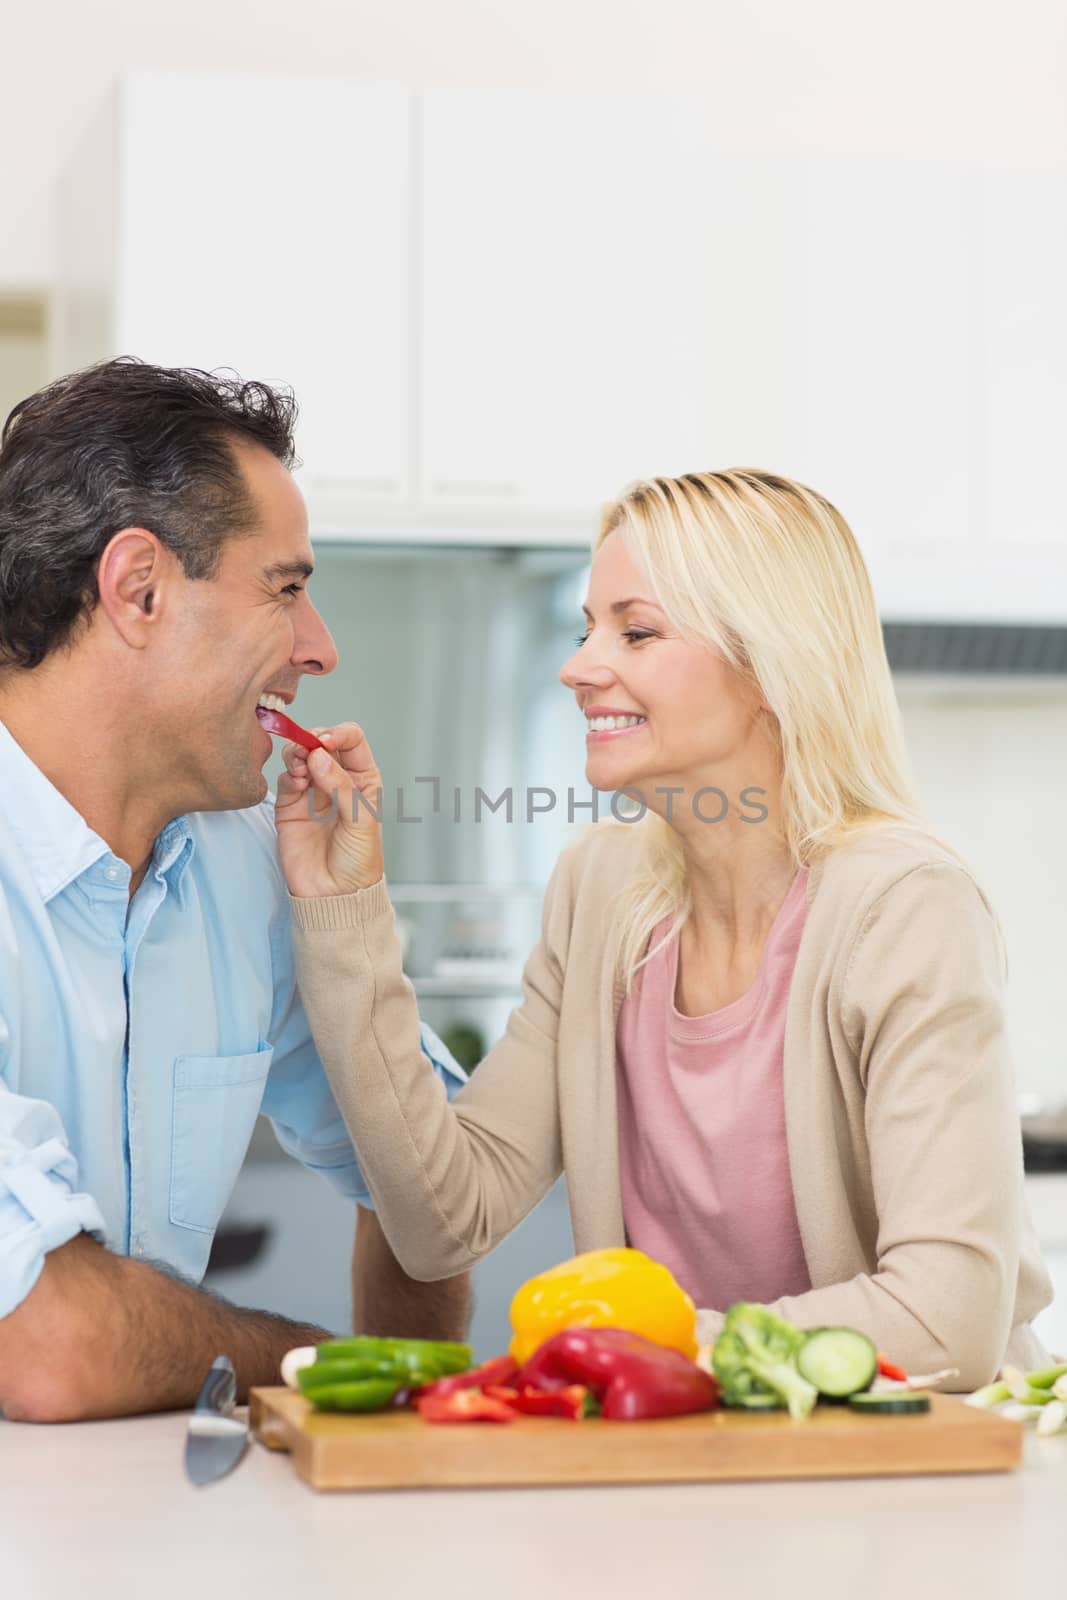 Happy loving woman feeding man vegetable in the kitchen at home